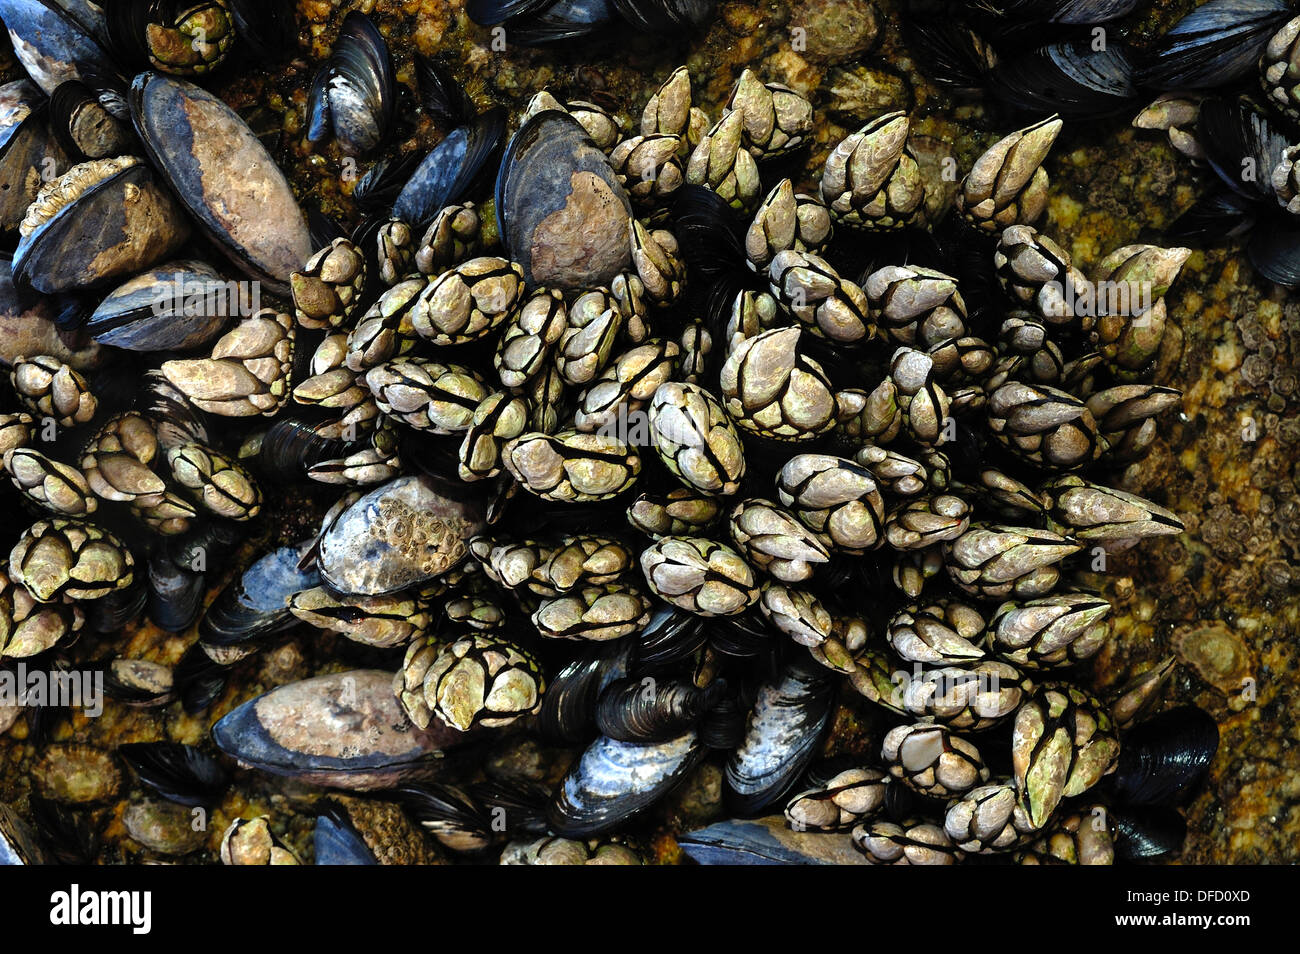 Coastal rocks covered in goose barnacles (pollicipes pollicipes) and mussels Stock Photo